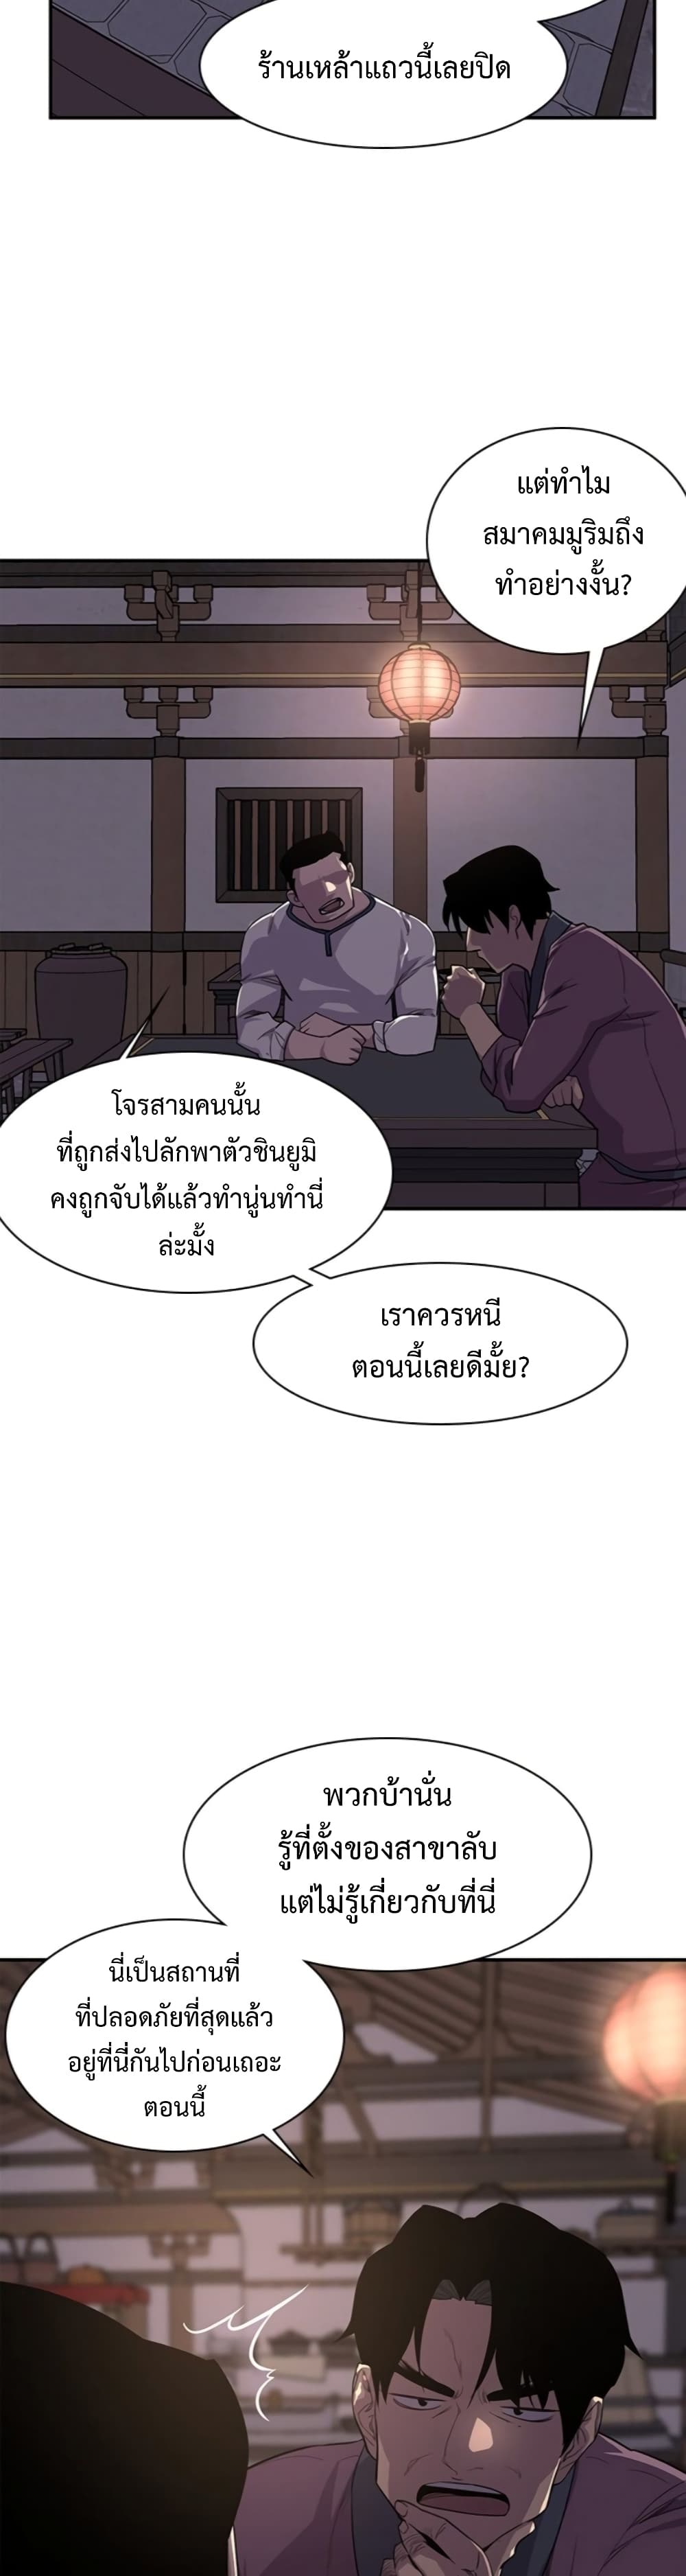 The Strongest Ever à¸à¸­à¸à¸à¸µà¹ 33 (47)